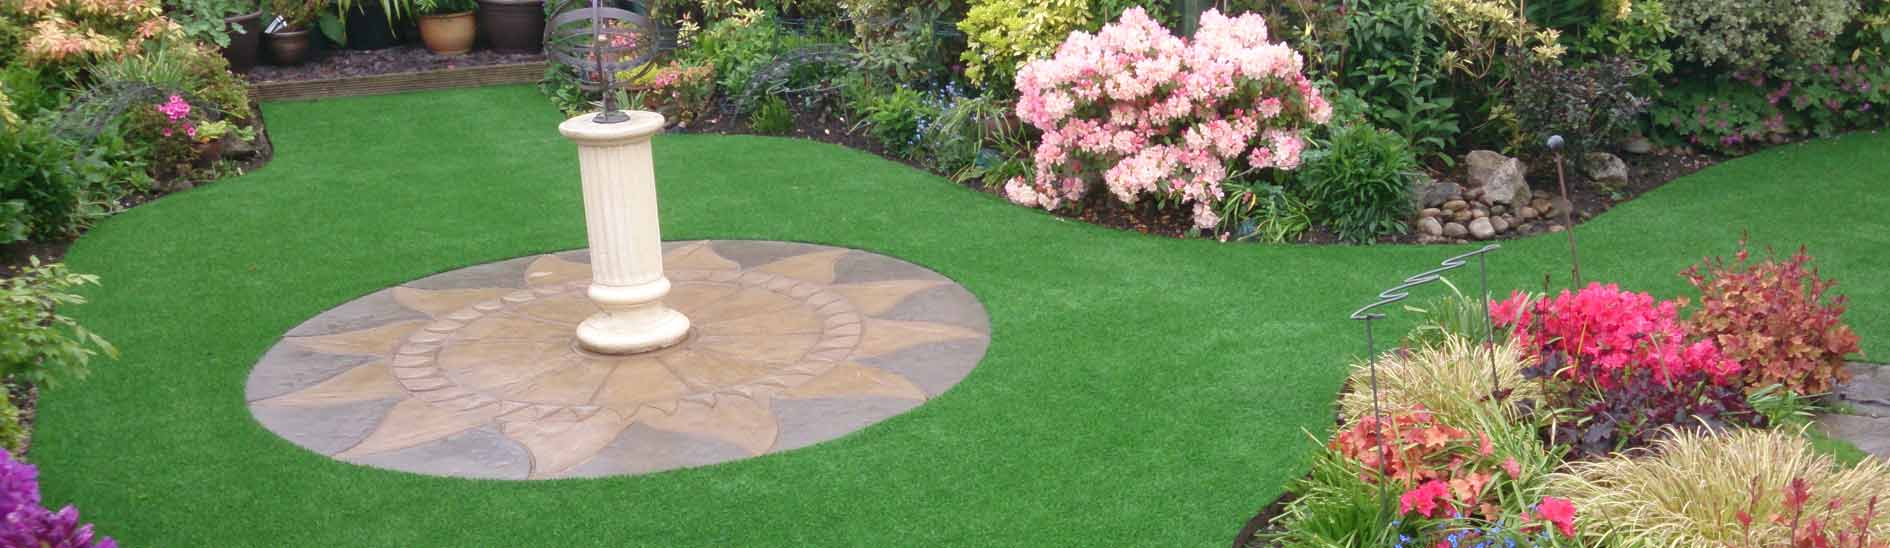 Artificial grass Landscaping in Dorset, Poole Hampshire and Bournemouth